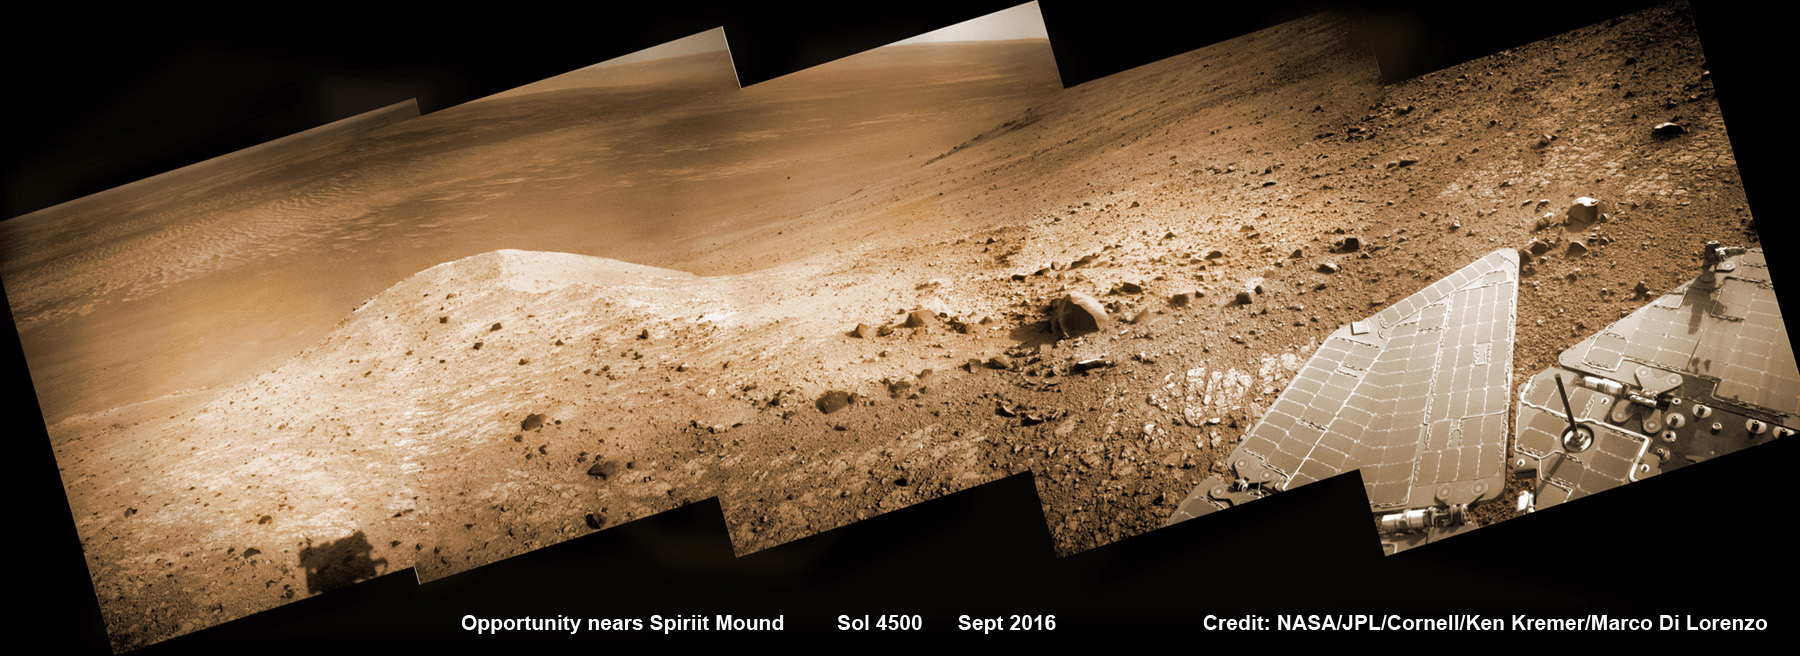 NASA’s Opportunity rover scans ahead to Spirit Mound and vast Endeavour crater as she celebrates 4500 sols on the Red Planet after descending down Marathon Valley. This navcam camera photo mosaic was assembled from raw images taken on Sol 4500 (20 Sept 2016) and colorized.  Credit: NASA/JPL/Cornell/ Ken Kremer/kenkremer.com/Marco Di Lorenzo 